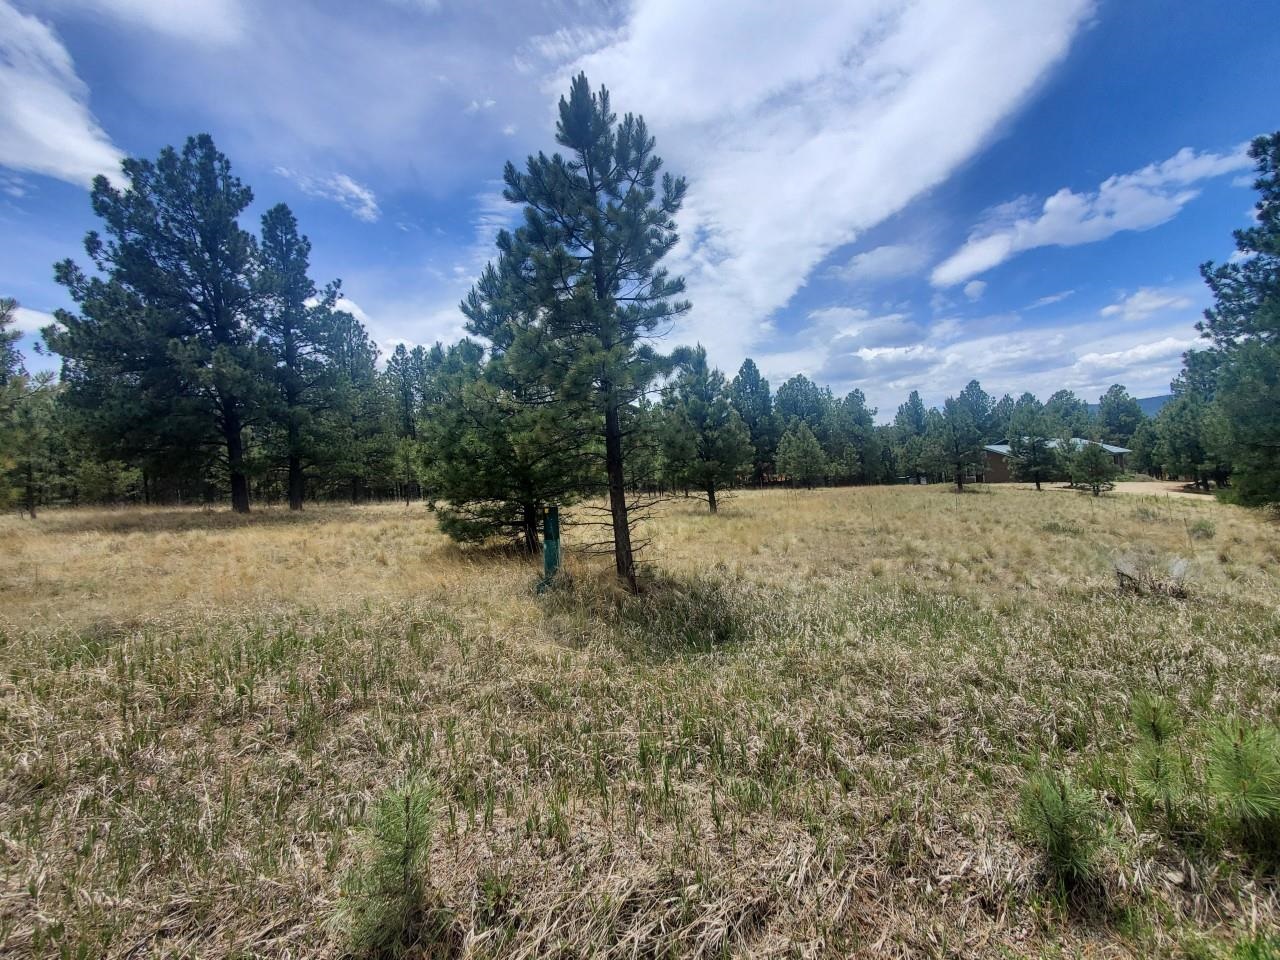 Great Location with a great opportunity! This lot is so close to the Angel Fire Resort and the PGA rated golf course and is accessible year round. The Angel Fire Community Center is within walking distance and offers various activities and a children's playground. So much to do in the area whether its enjoying the ski slopes and snow in the winter or biking/hiking/fishing/golfing in the cool temperatures of the summer.